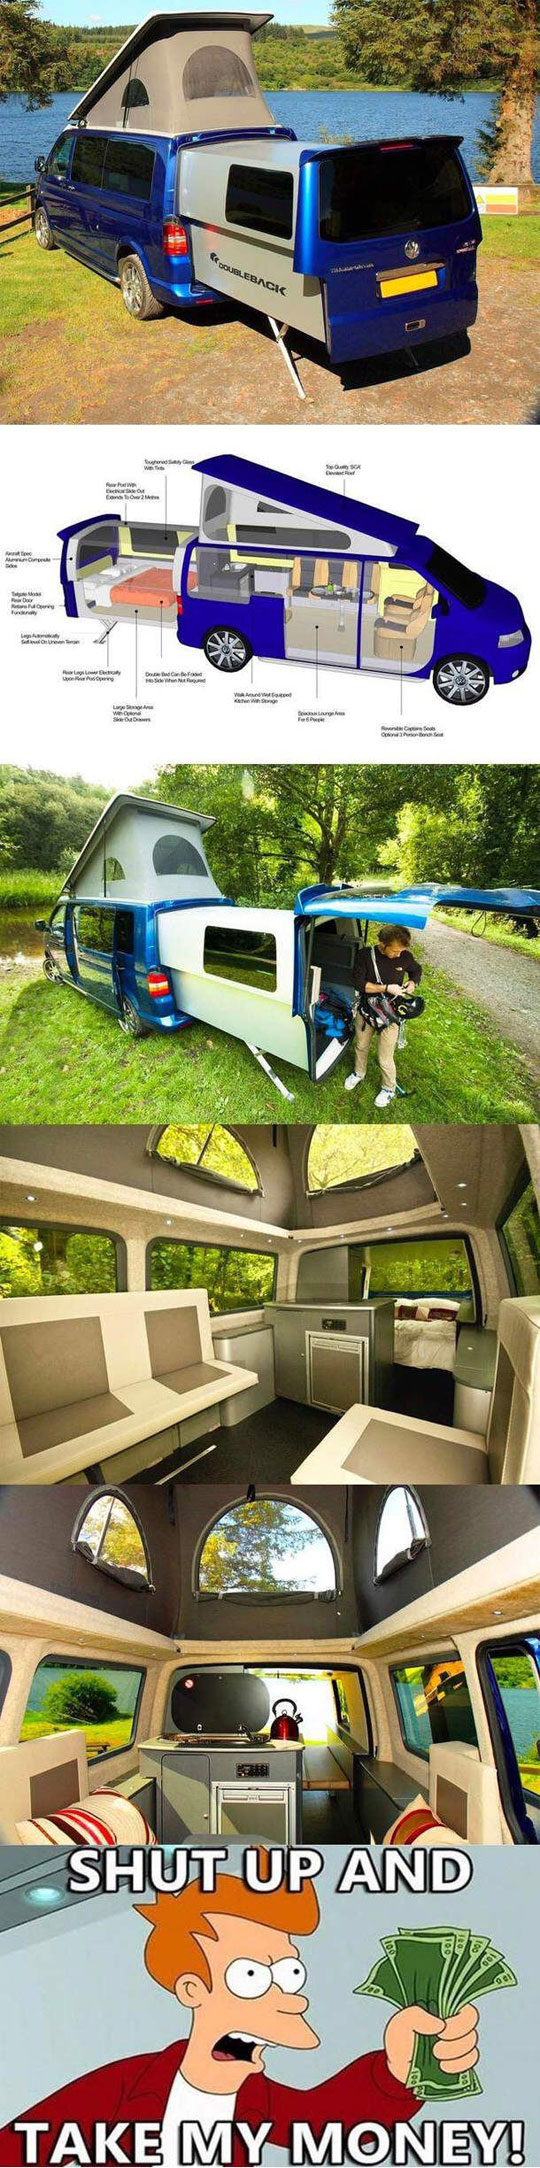 An Amazing Van For Campers